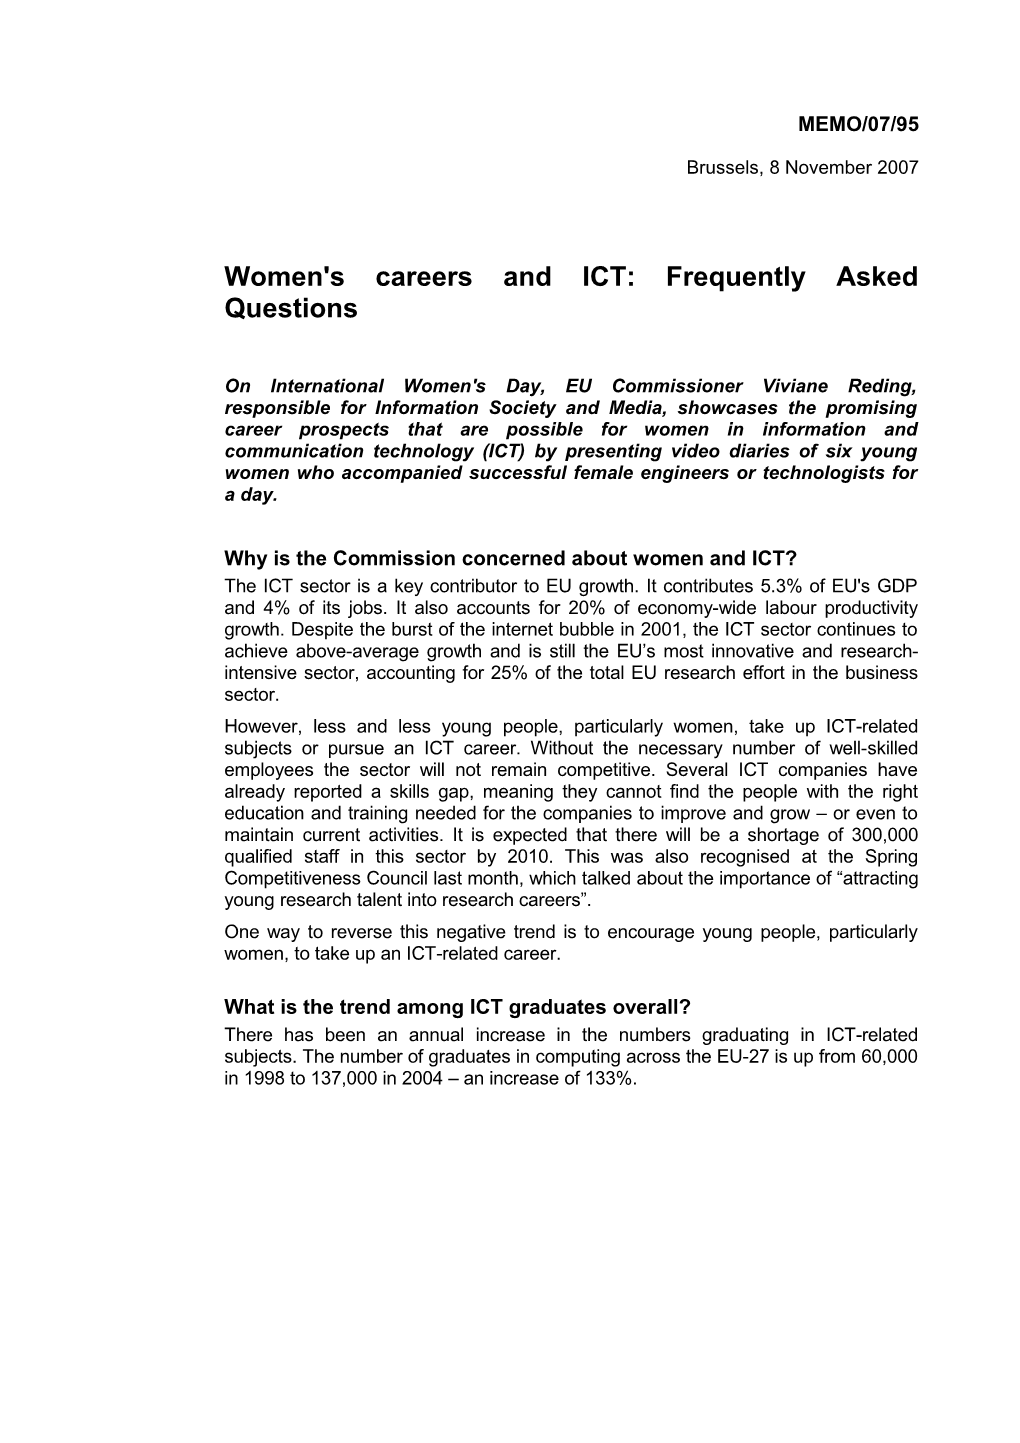 Women's Careers and ICT: Frequently Asked Questions